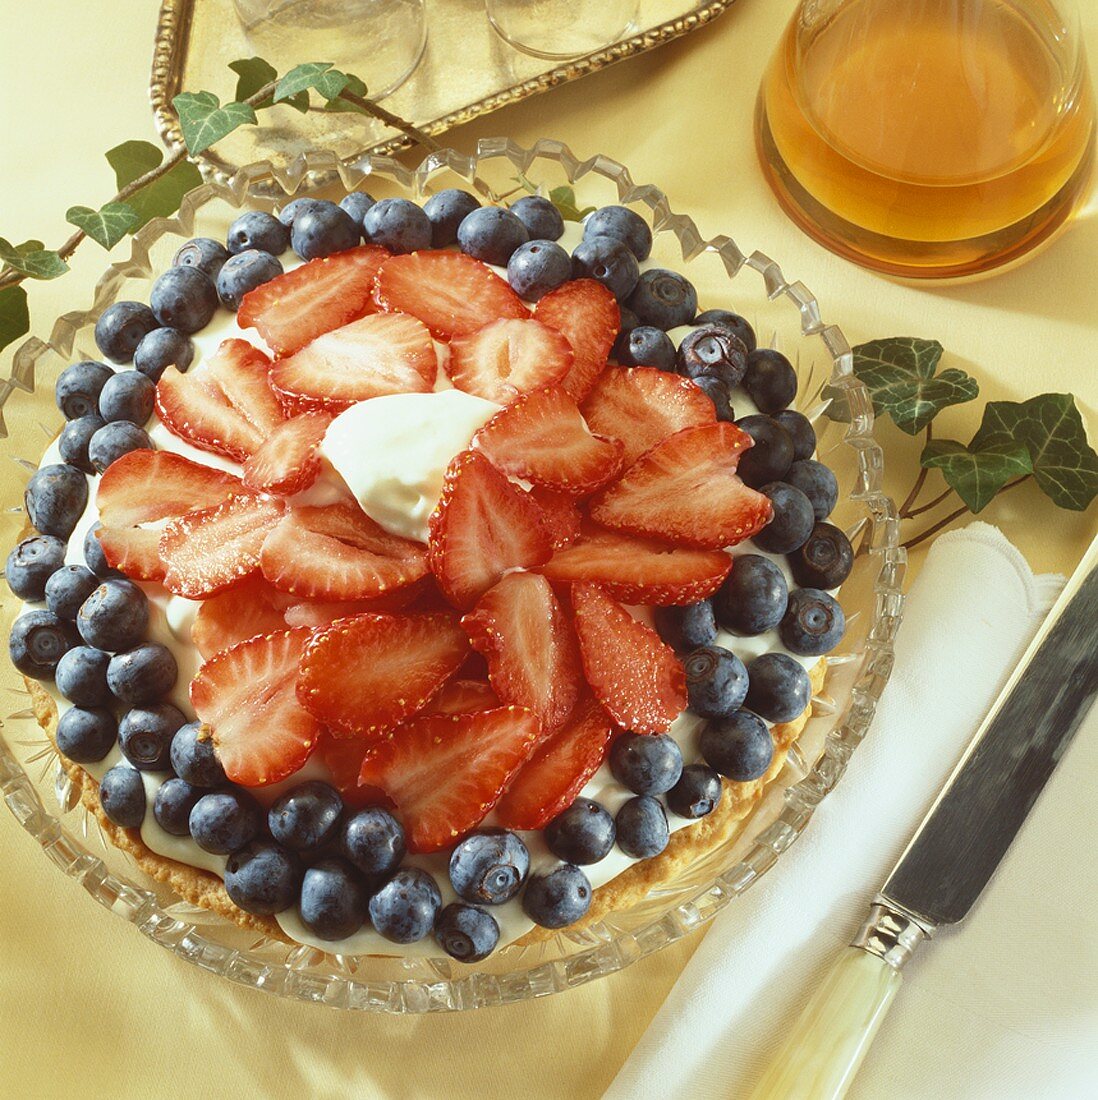 Strawberry and blueberry torte